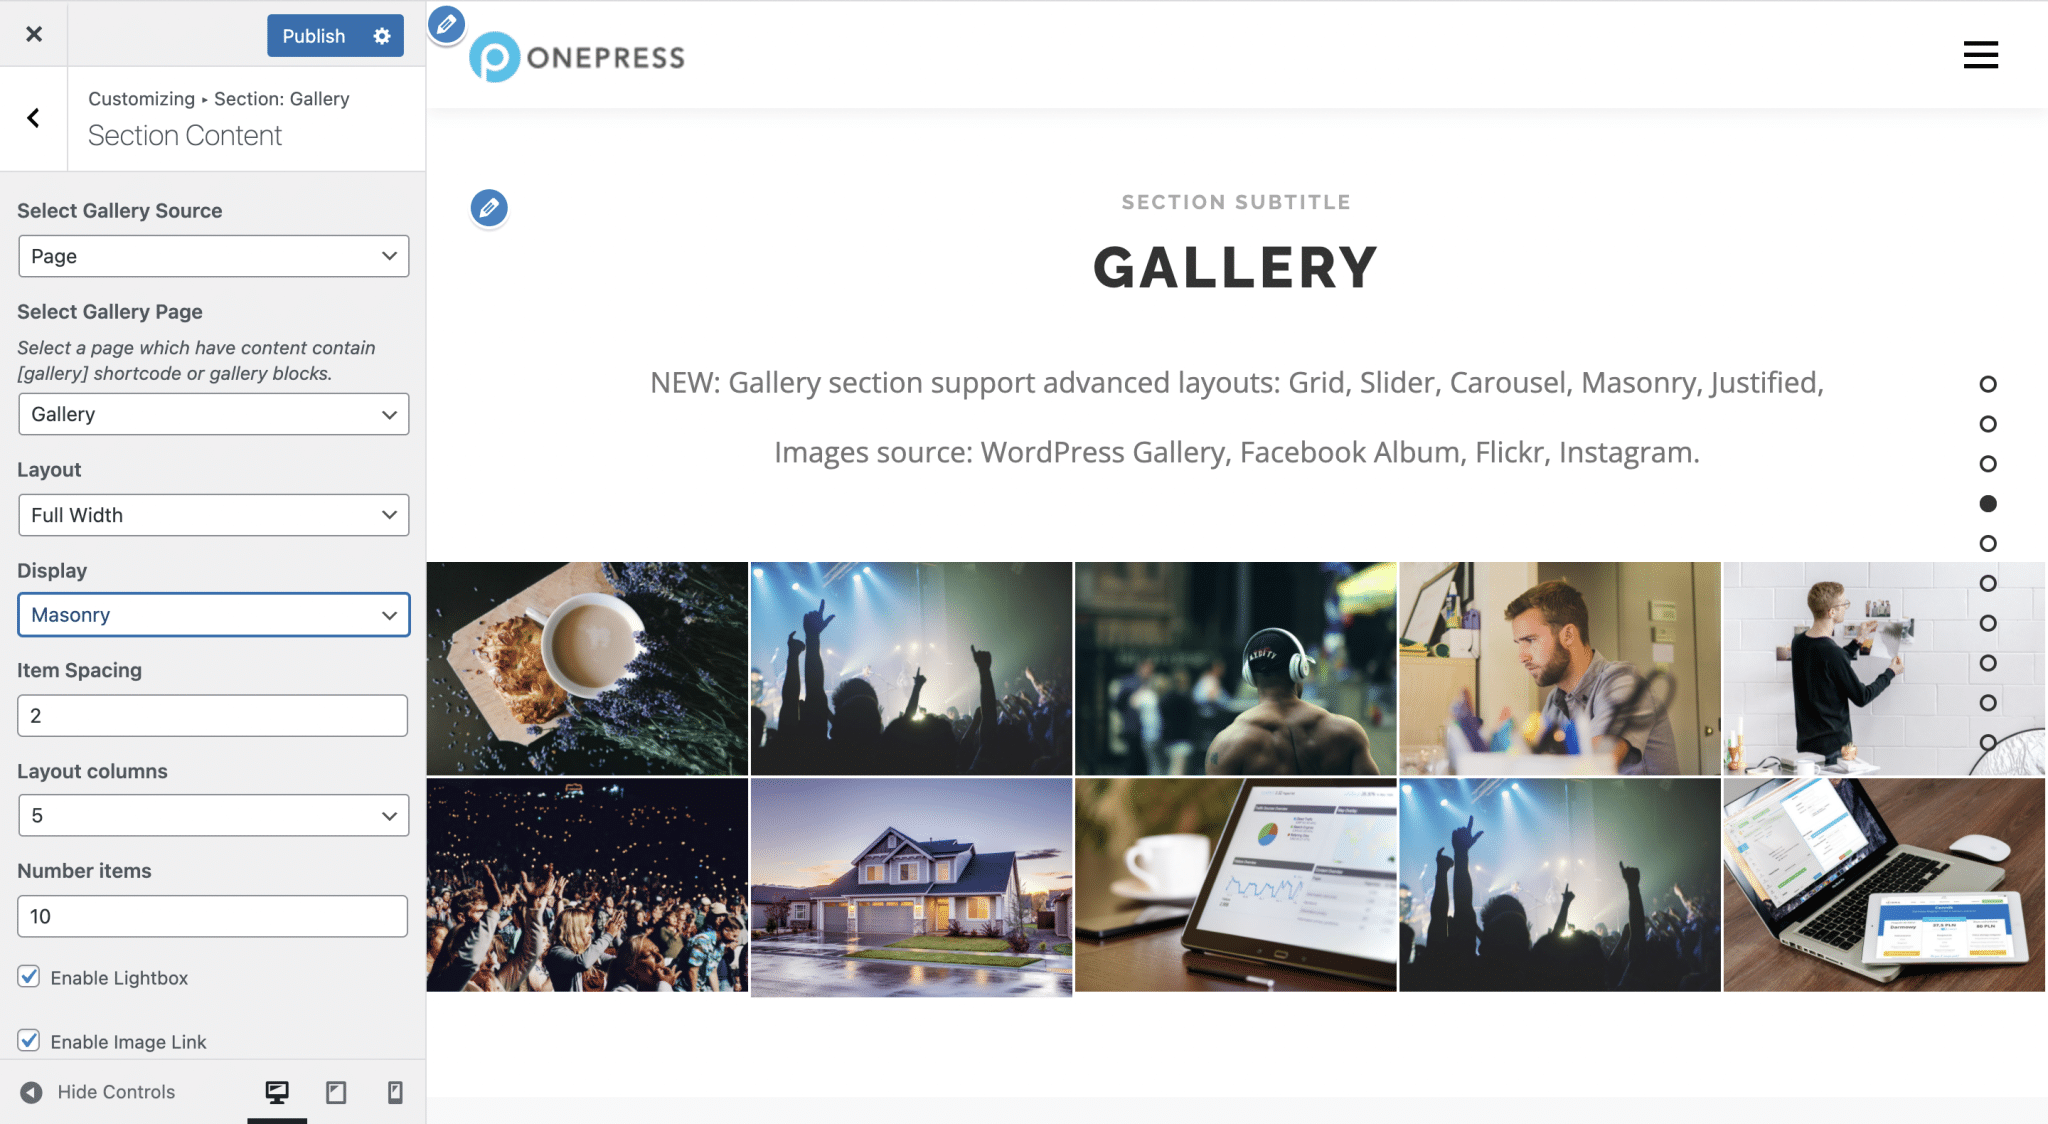 "Gallery" section settings of a WordPress OnePress site.